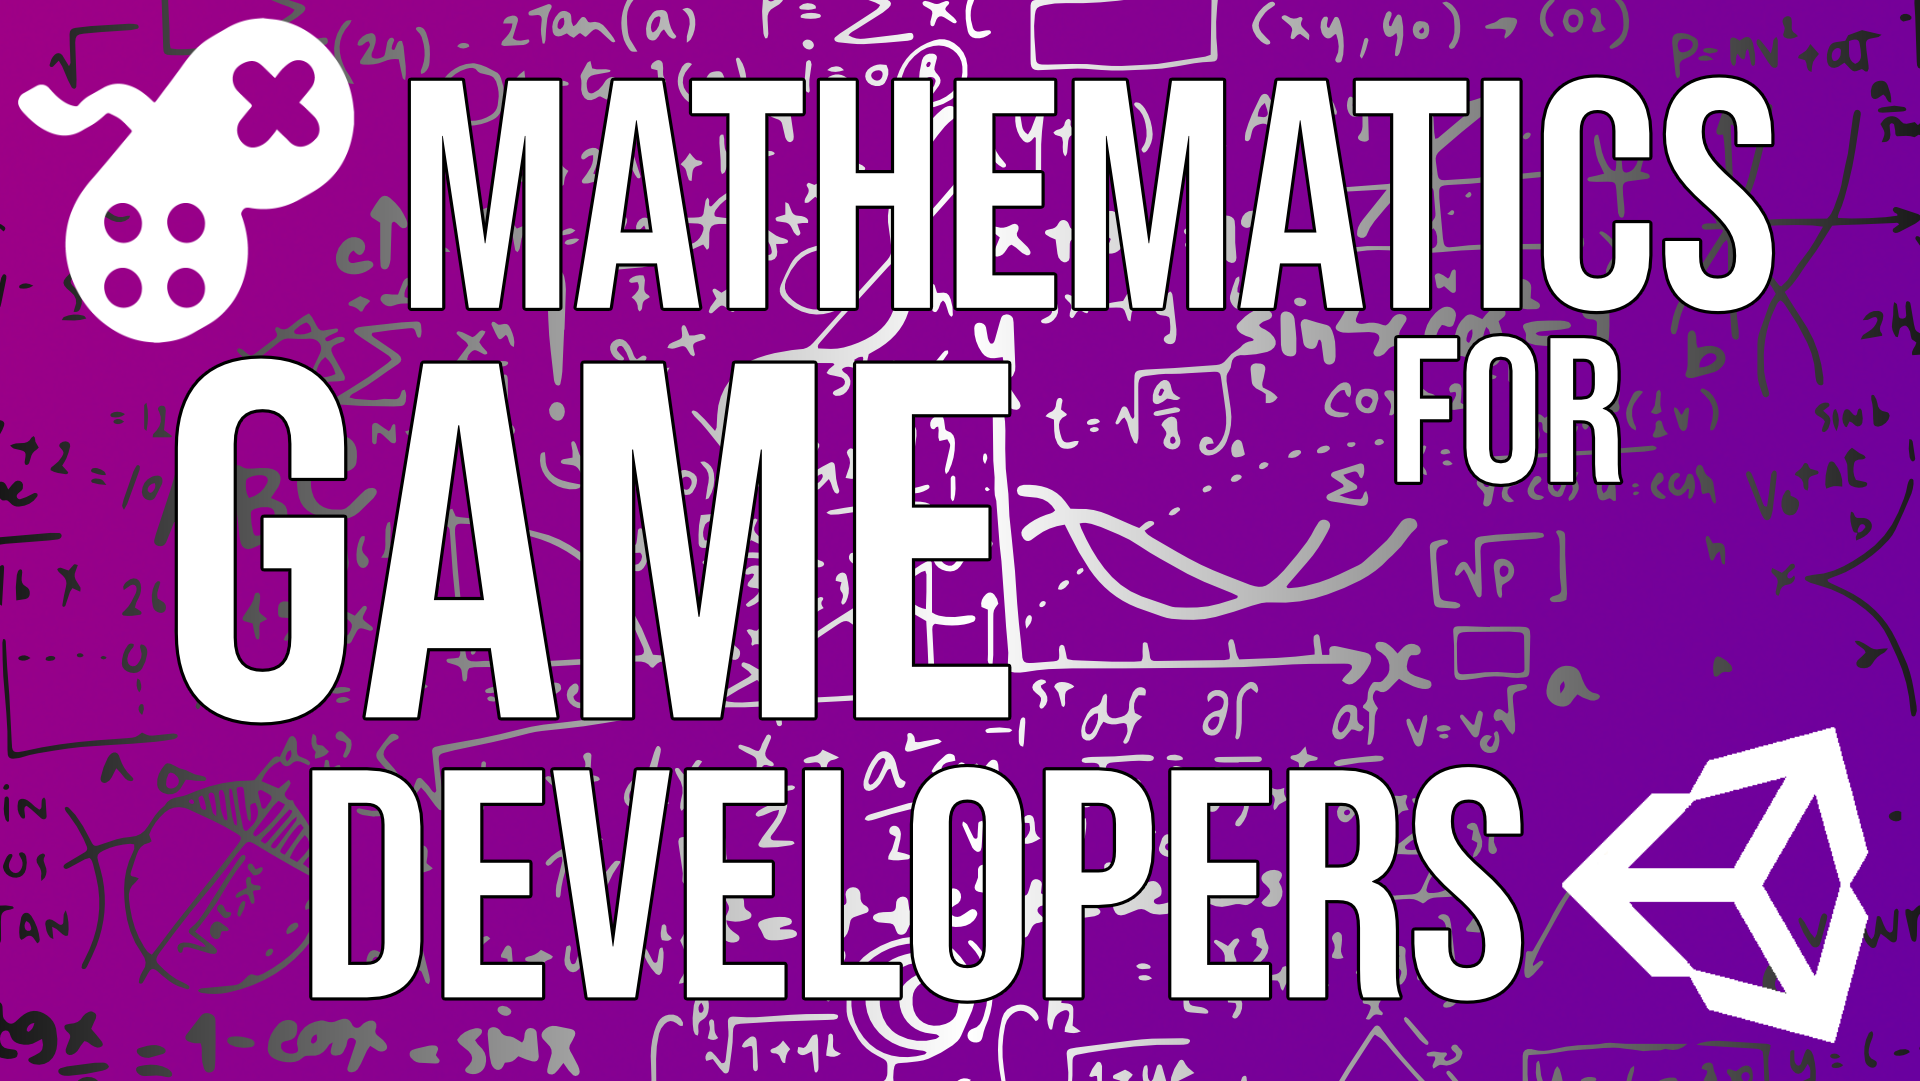 Mathematics for Game Developers